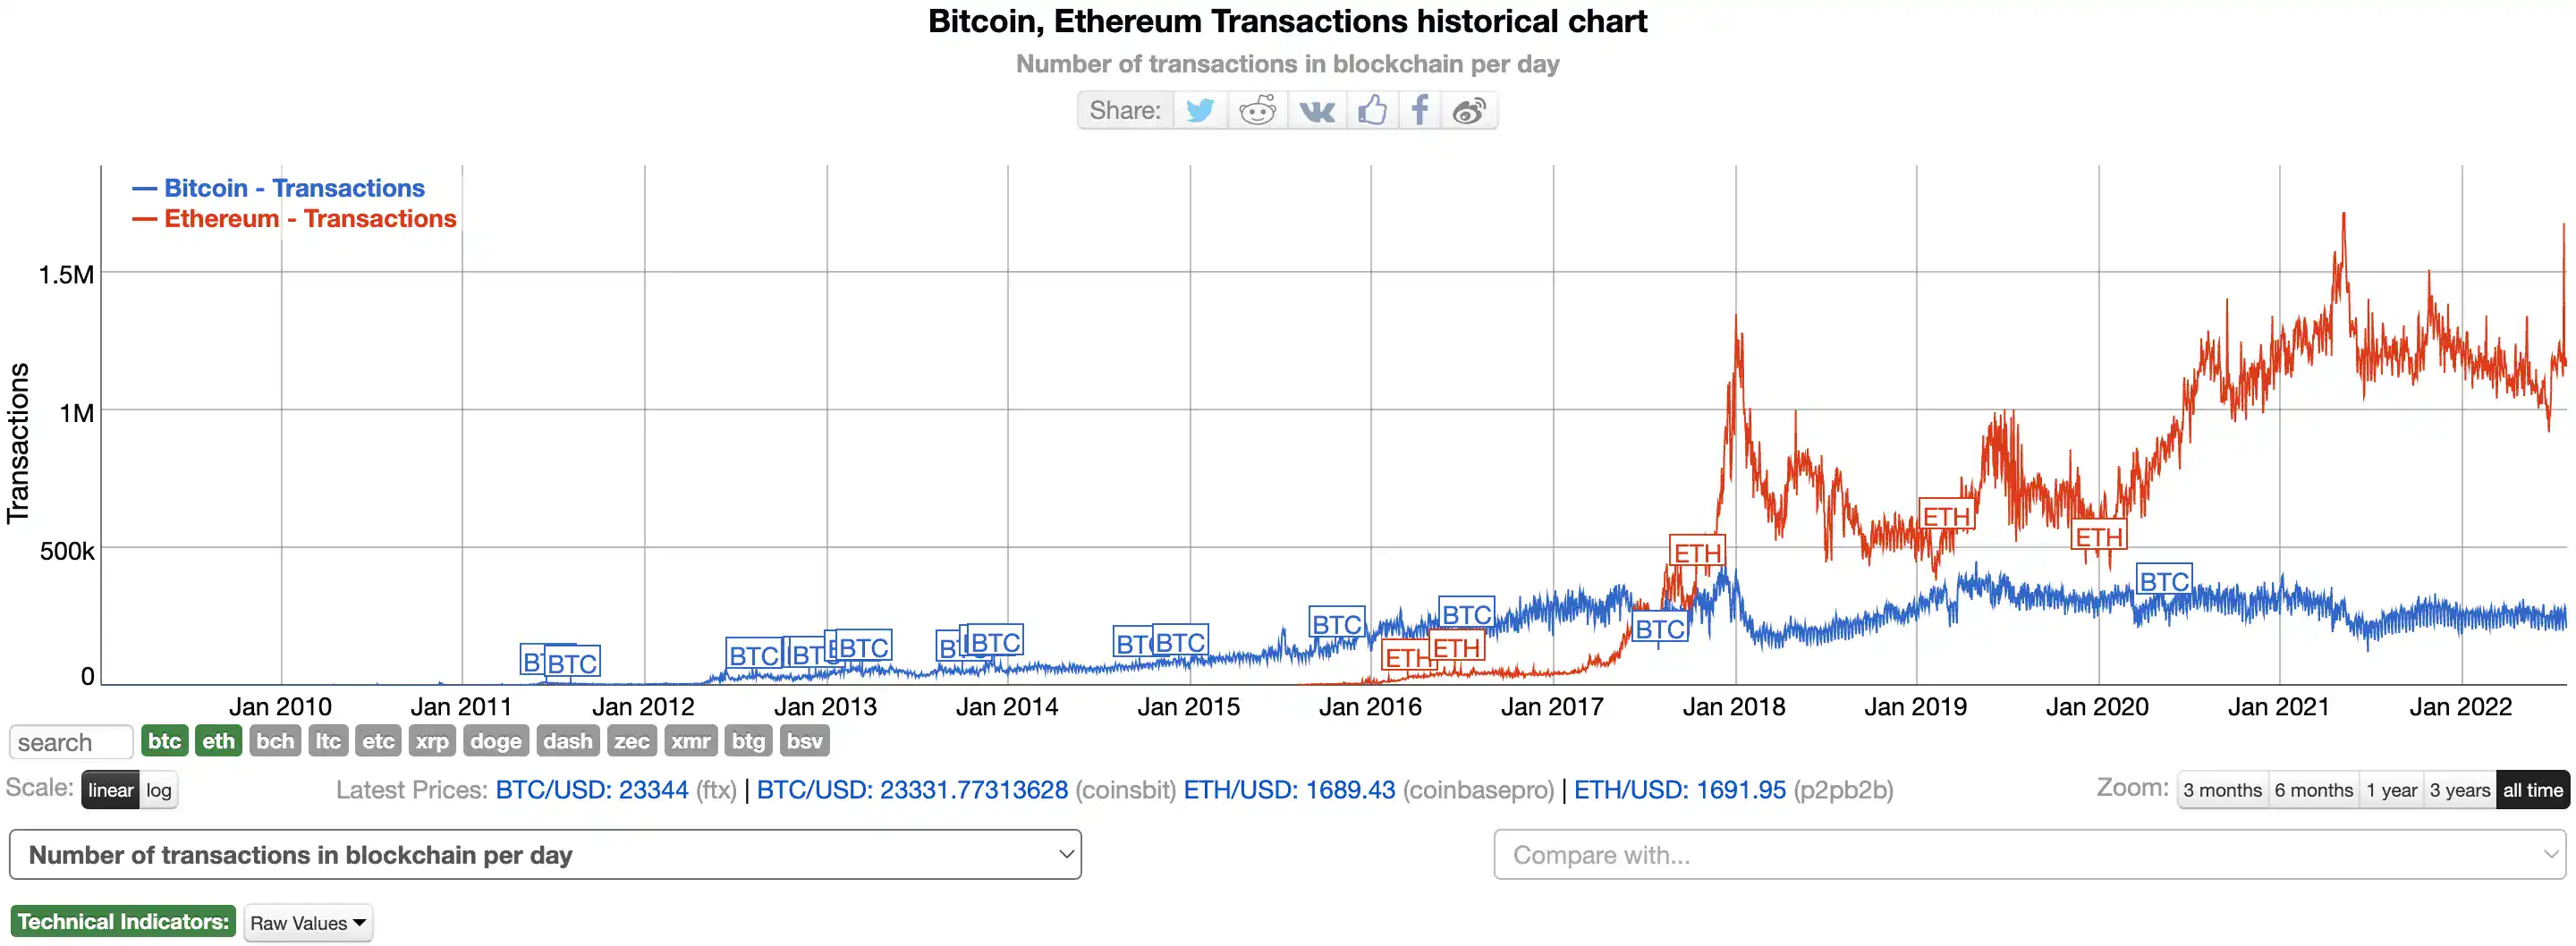 Ethereum and Bitcoin transactions per day